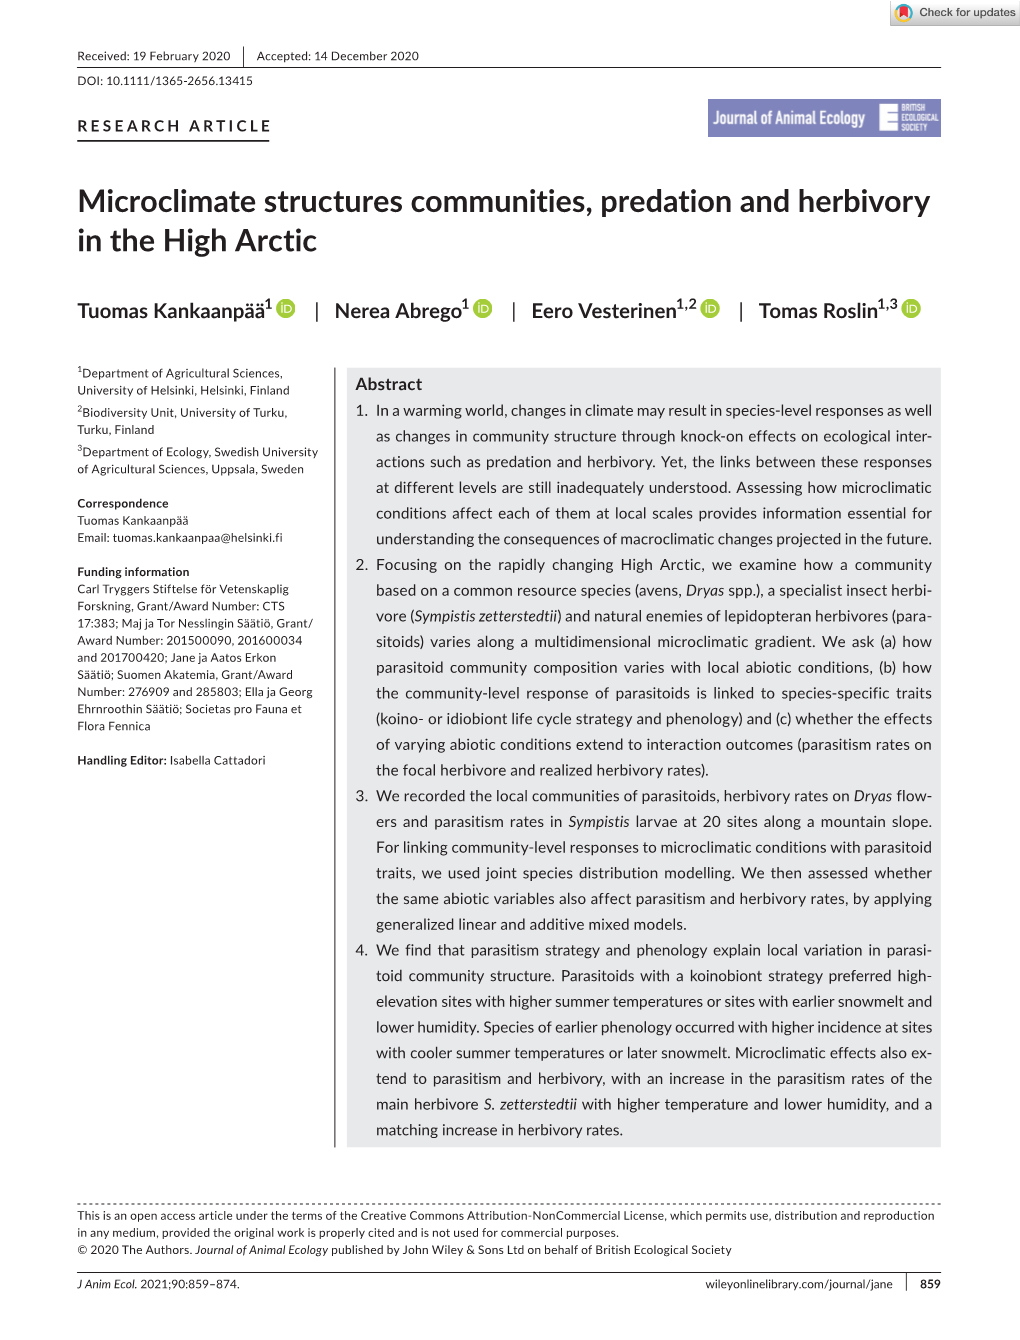 Microclimate Structures Communities, Predation and Herbivory in the High Arctic